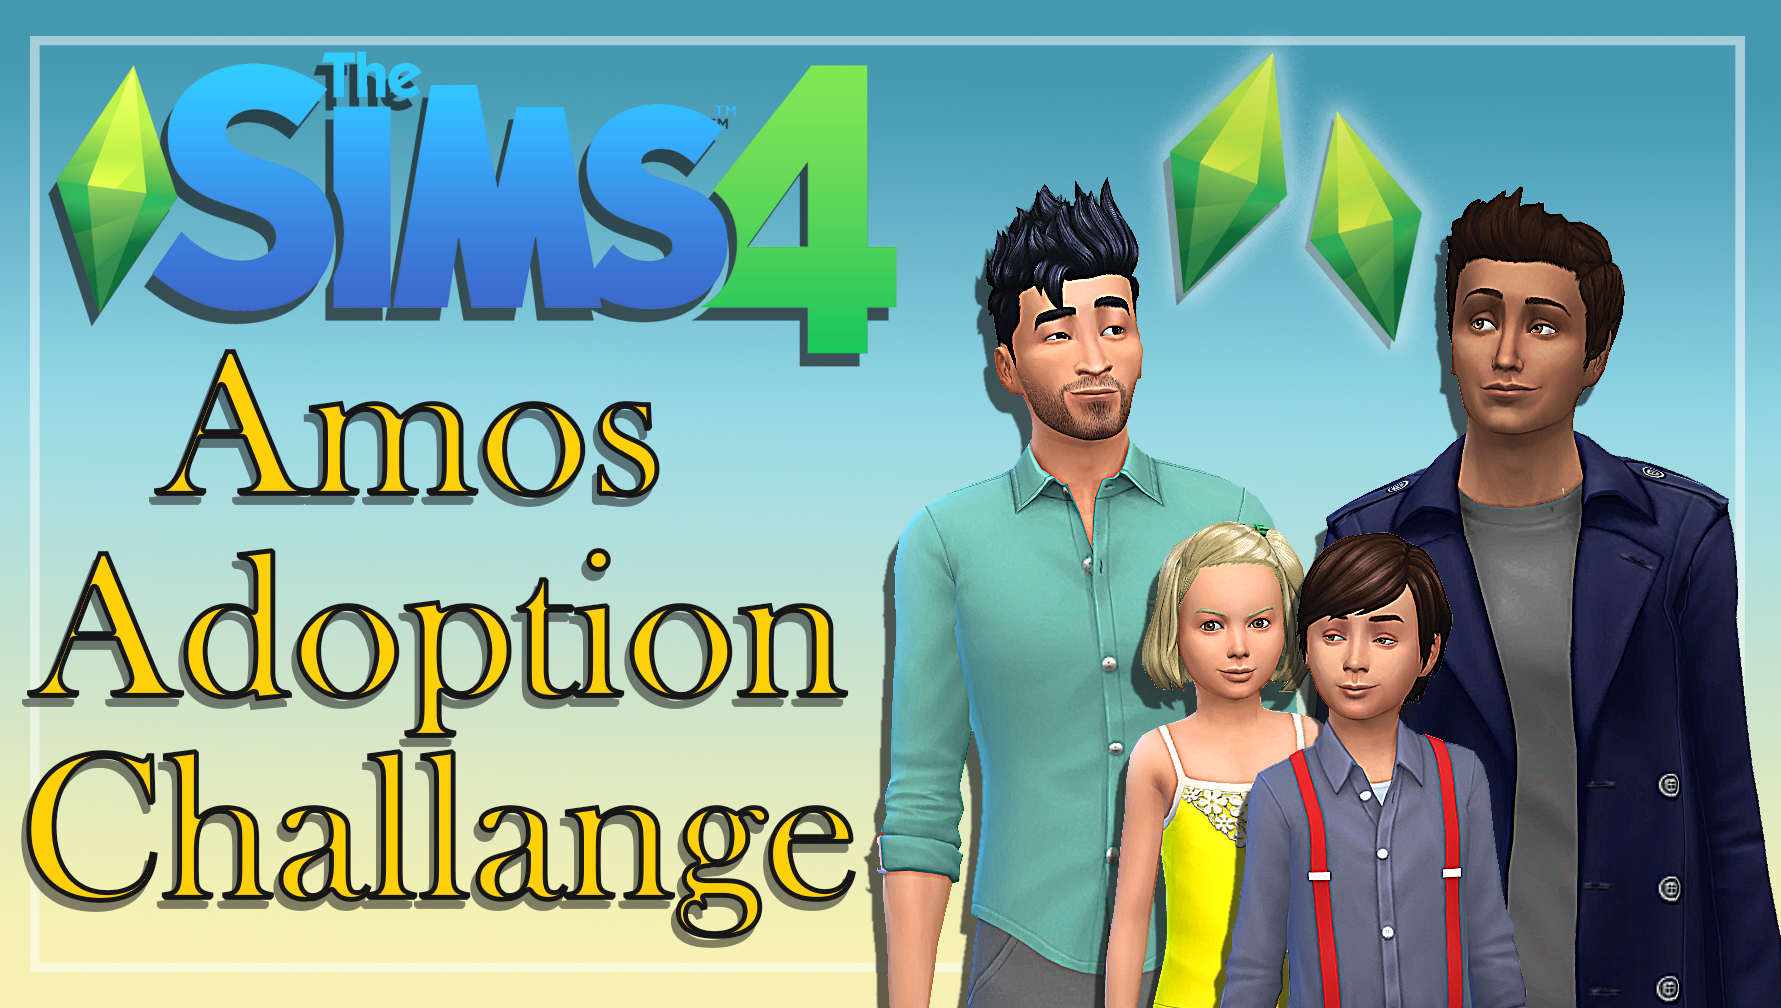 Sims 4: Amos Adoption Challenge Part 1: Introductions